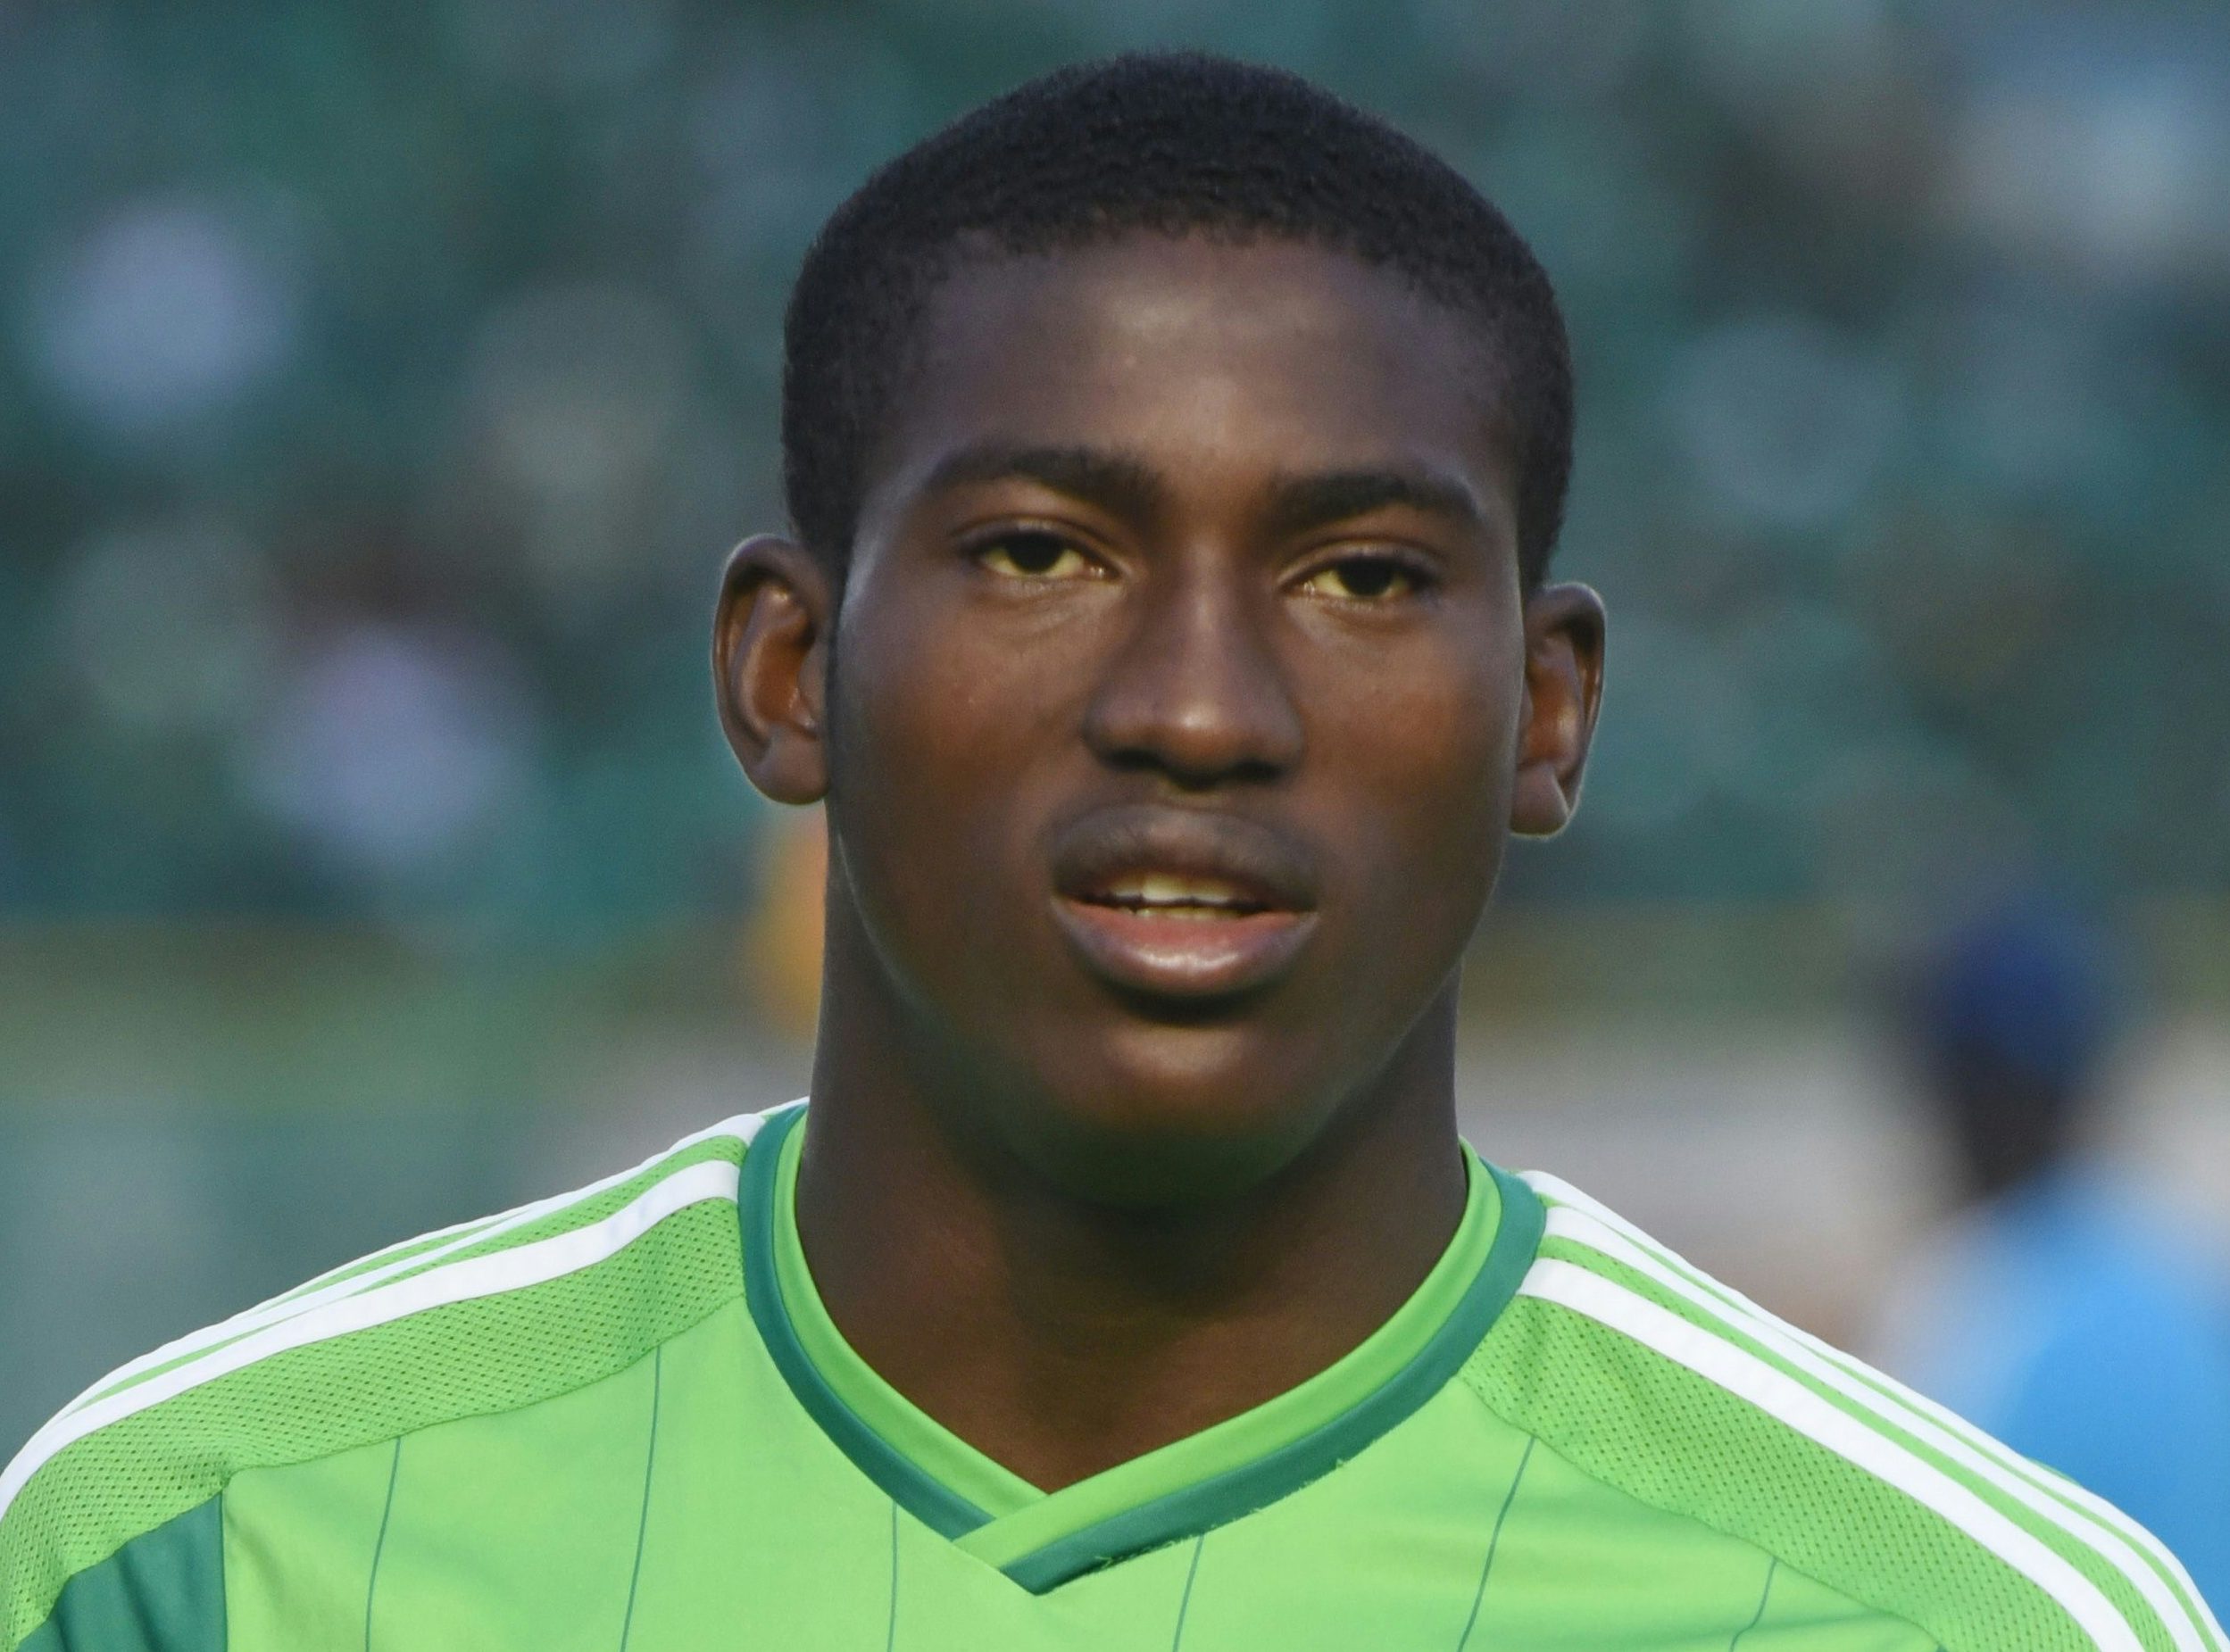 Nigerian player Awoniyi Taiwo Michael poses before the final football match of the 2015 African U-20 Championships Senegal against Nigeria, on March 22, 2015